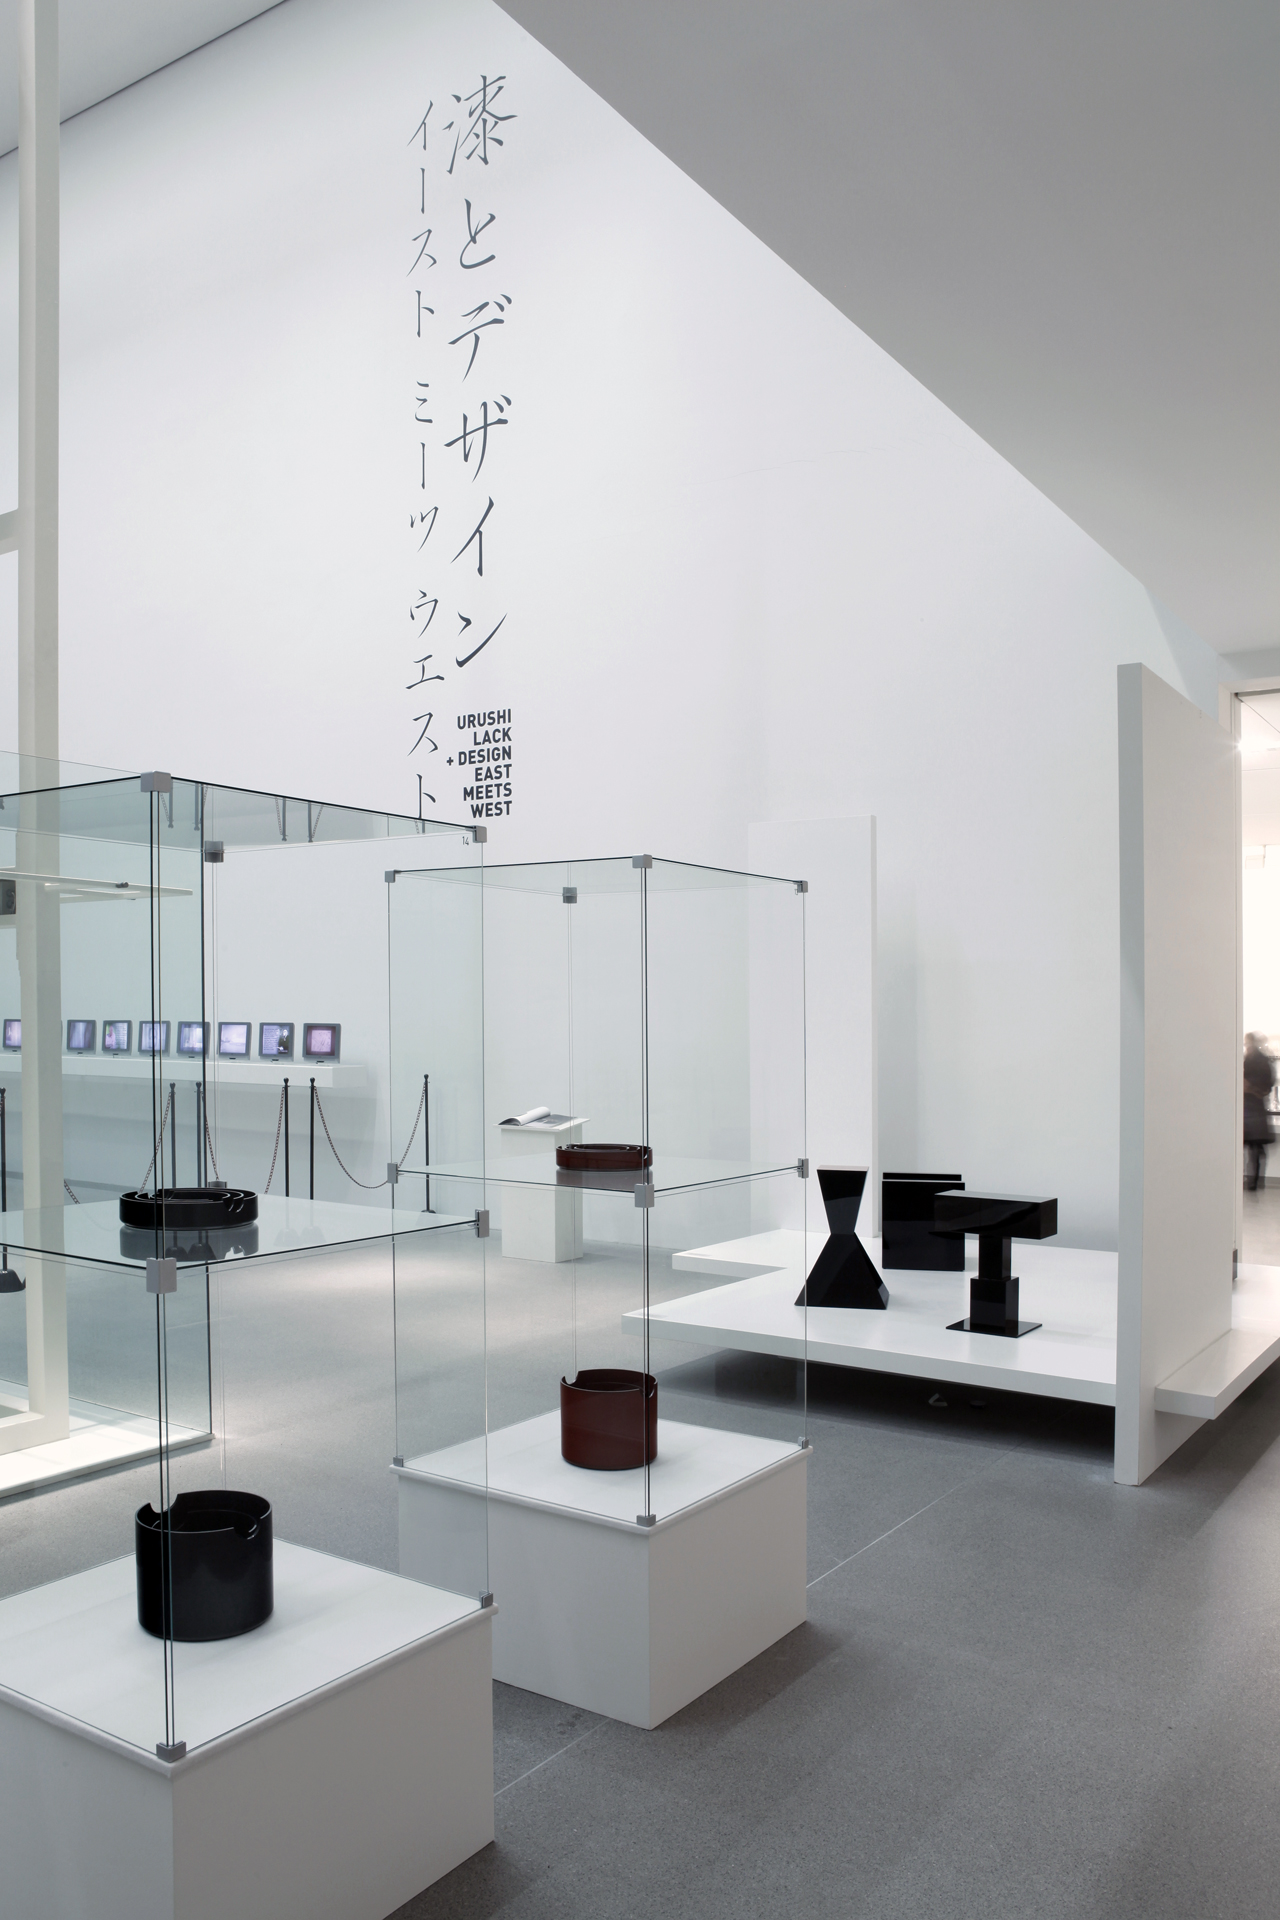 View of the exhibition. In a light-flooded room, you can see tall glass display cases and white pedestals in and on which black exhibits are placed. Japanese characters can be seen on the right-hand wall.